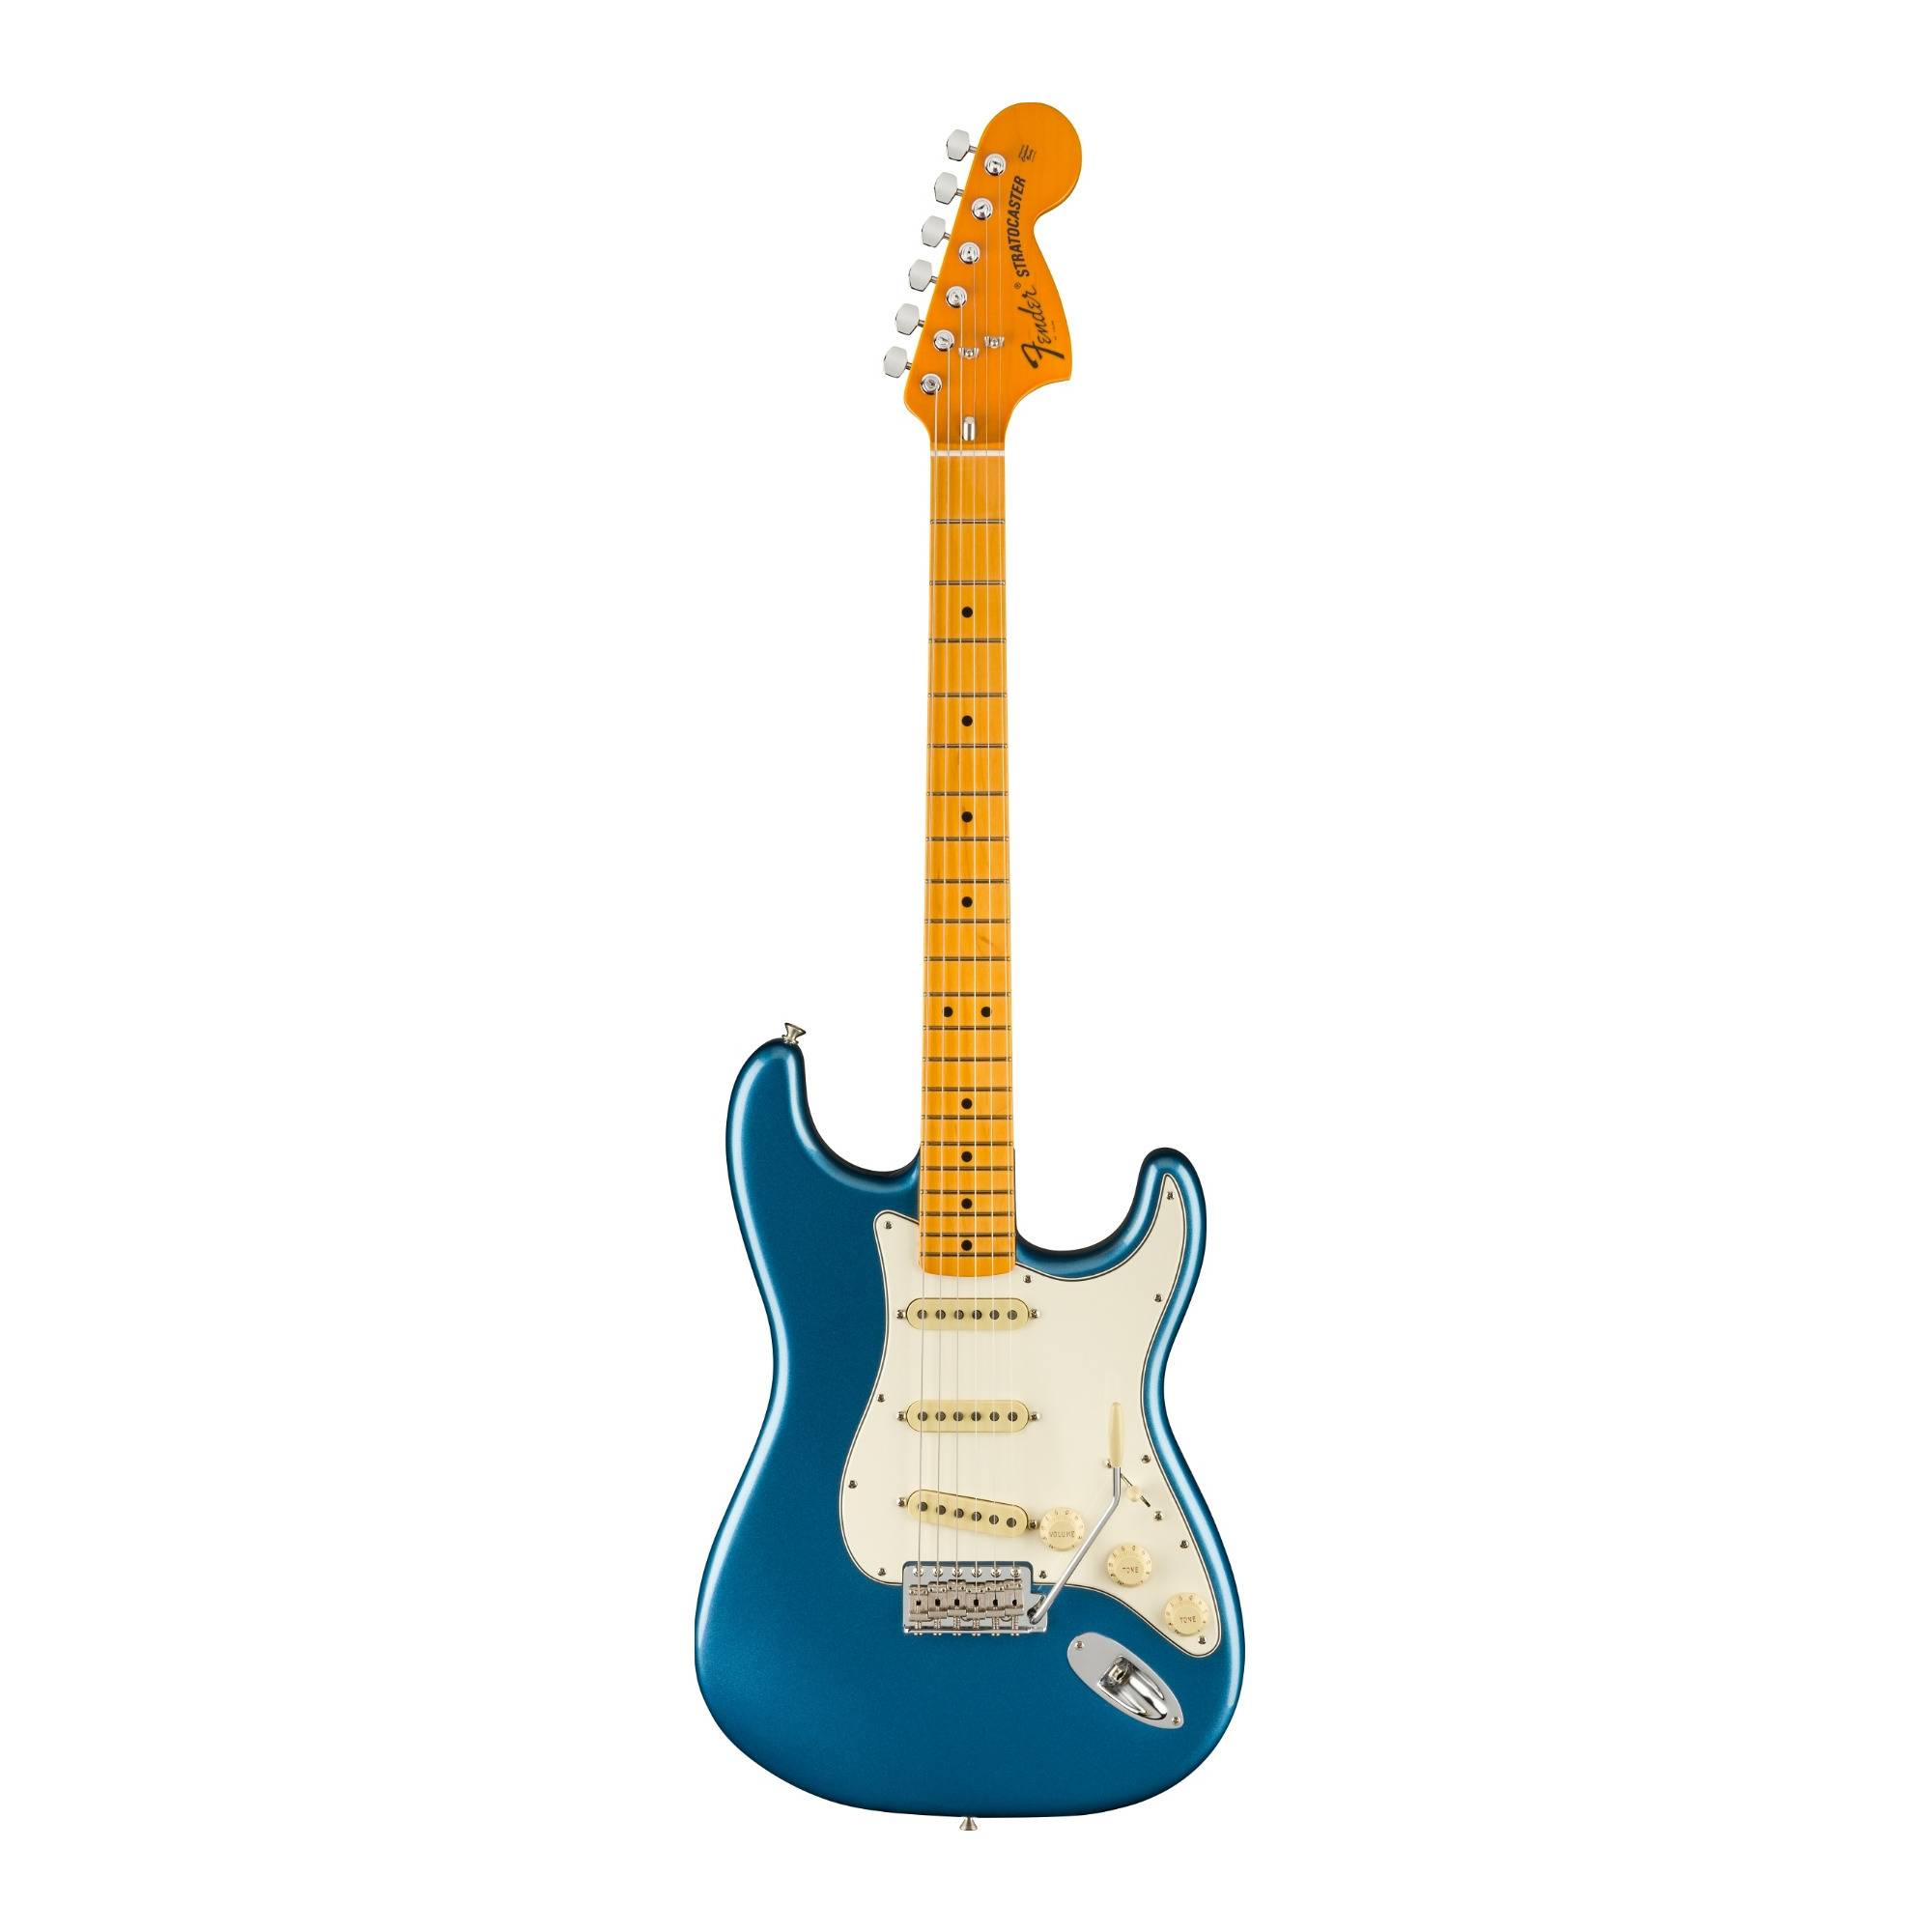 Fender American Vintage II 1973 Stratocaster 6-String Electric Guitar (Right-Hand, Lake Placid Blue)